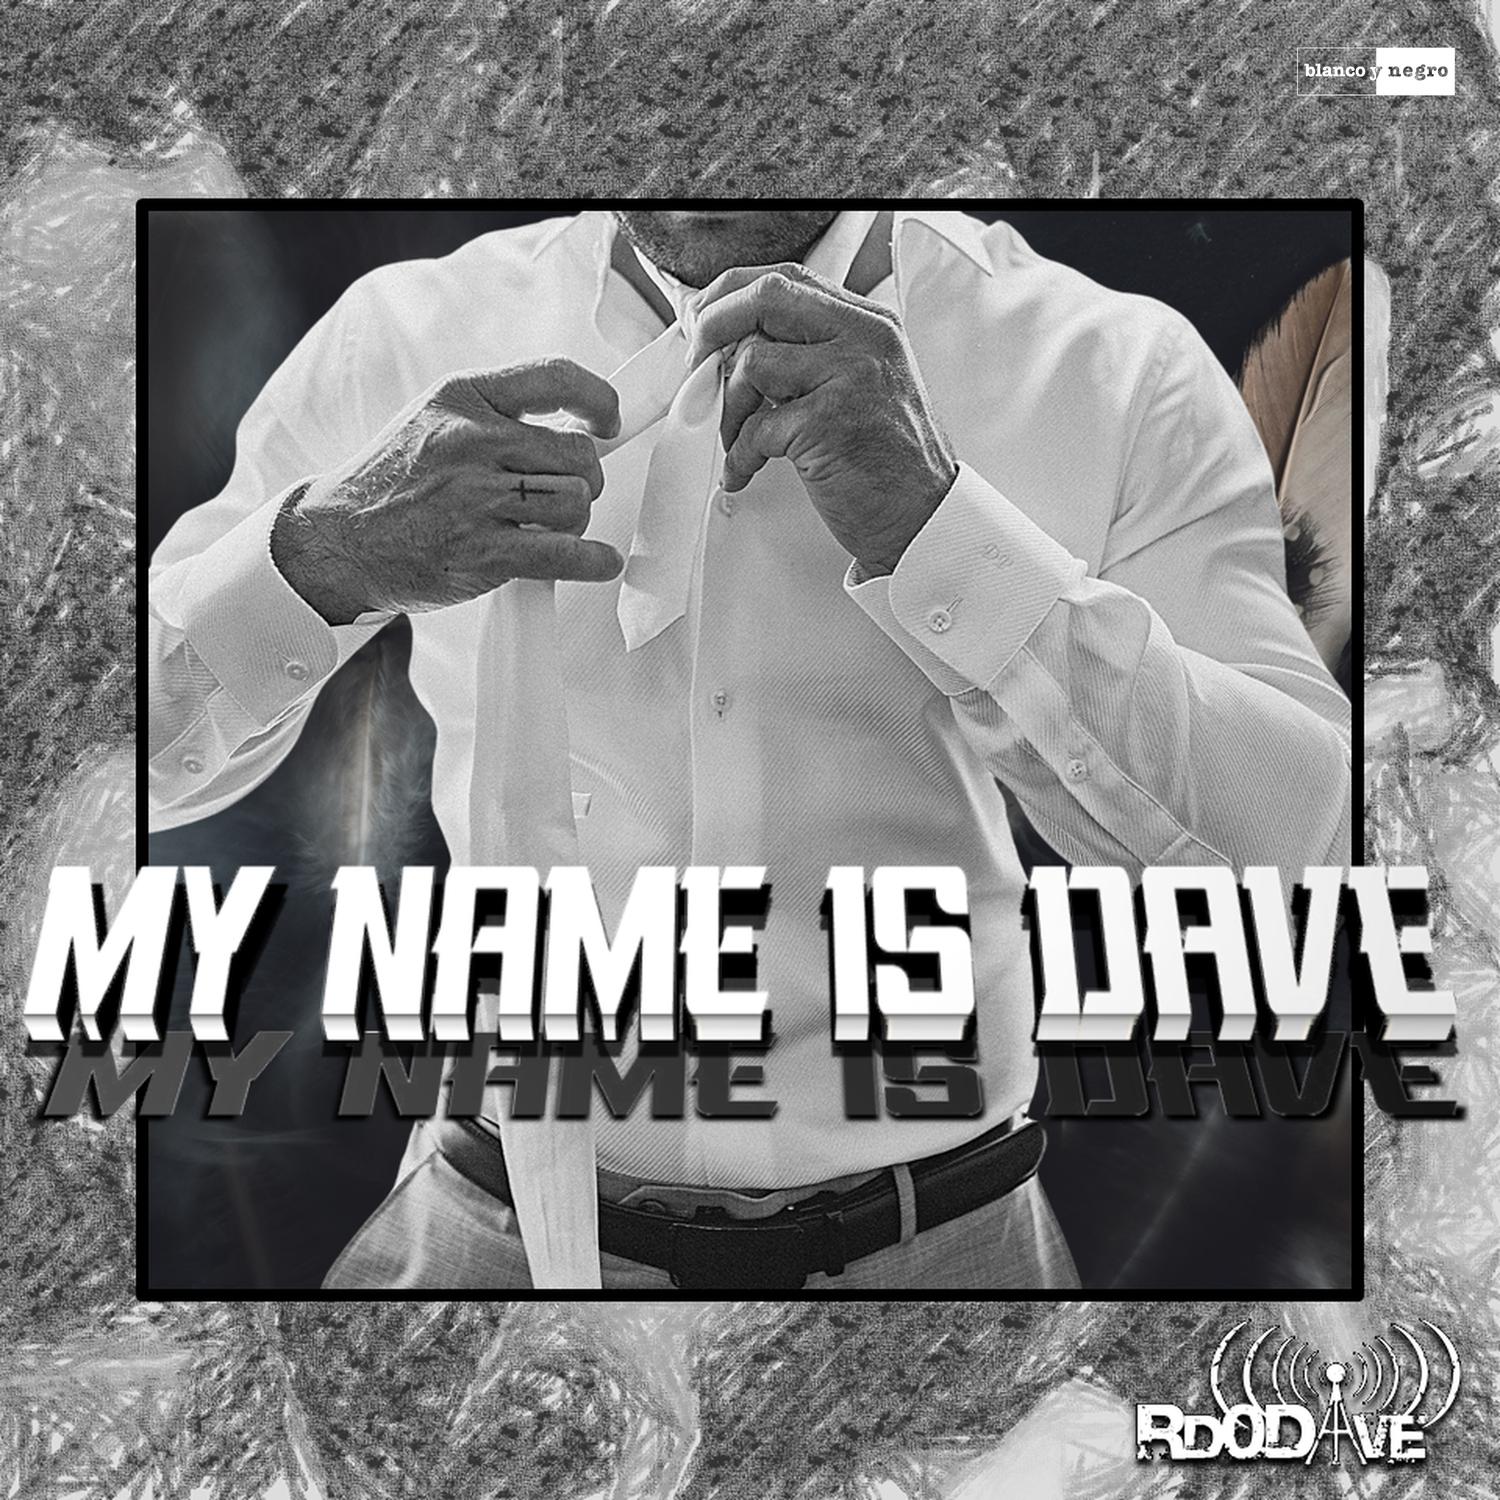 Rd0Dave - My Name is Dave